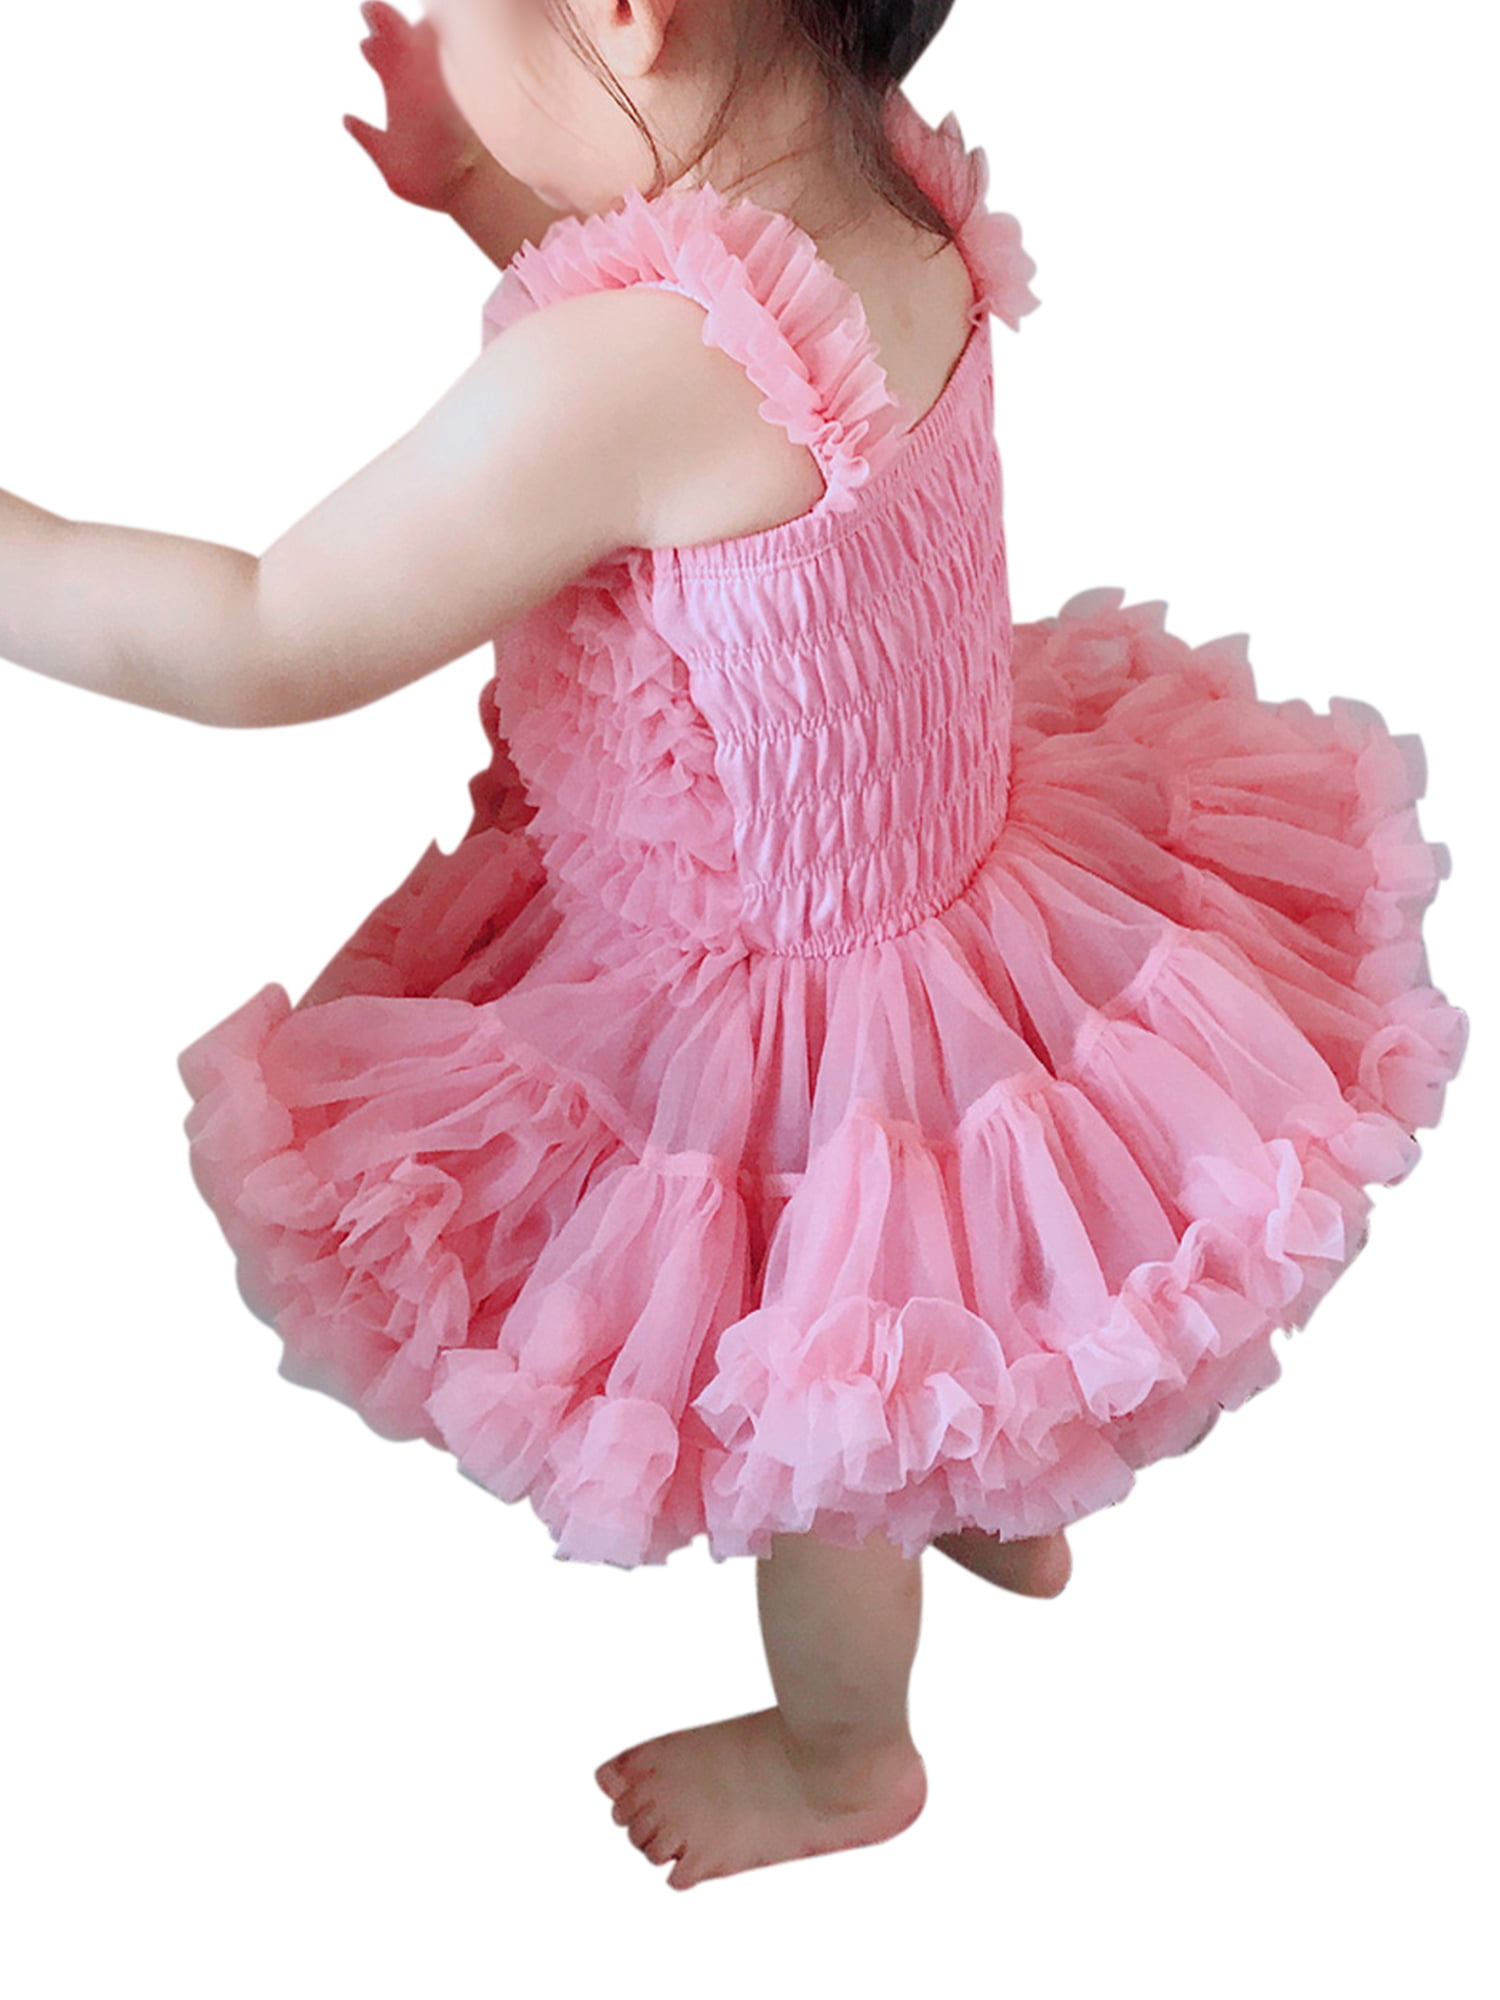 Baby Kids Girl Toddler Princess Pageant Party Tutu Dress Lace Bow Flower Dresses